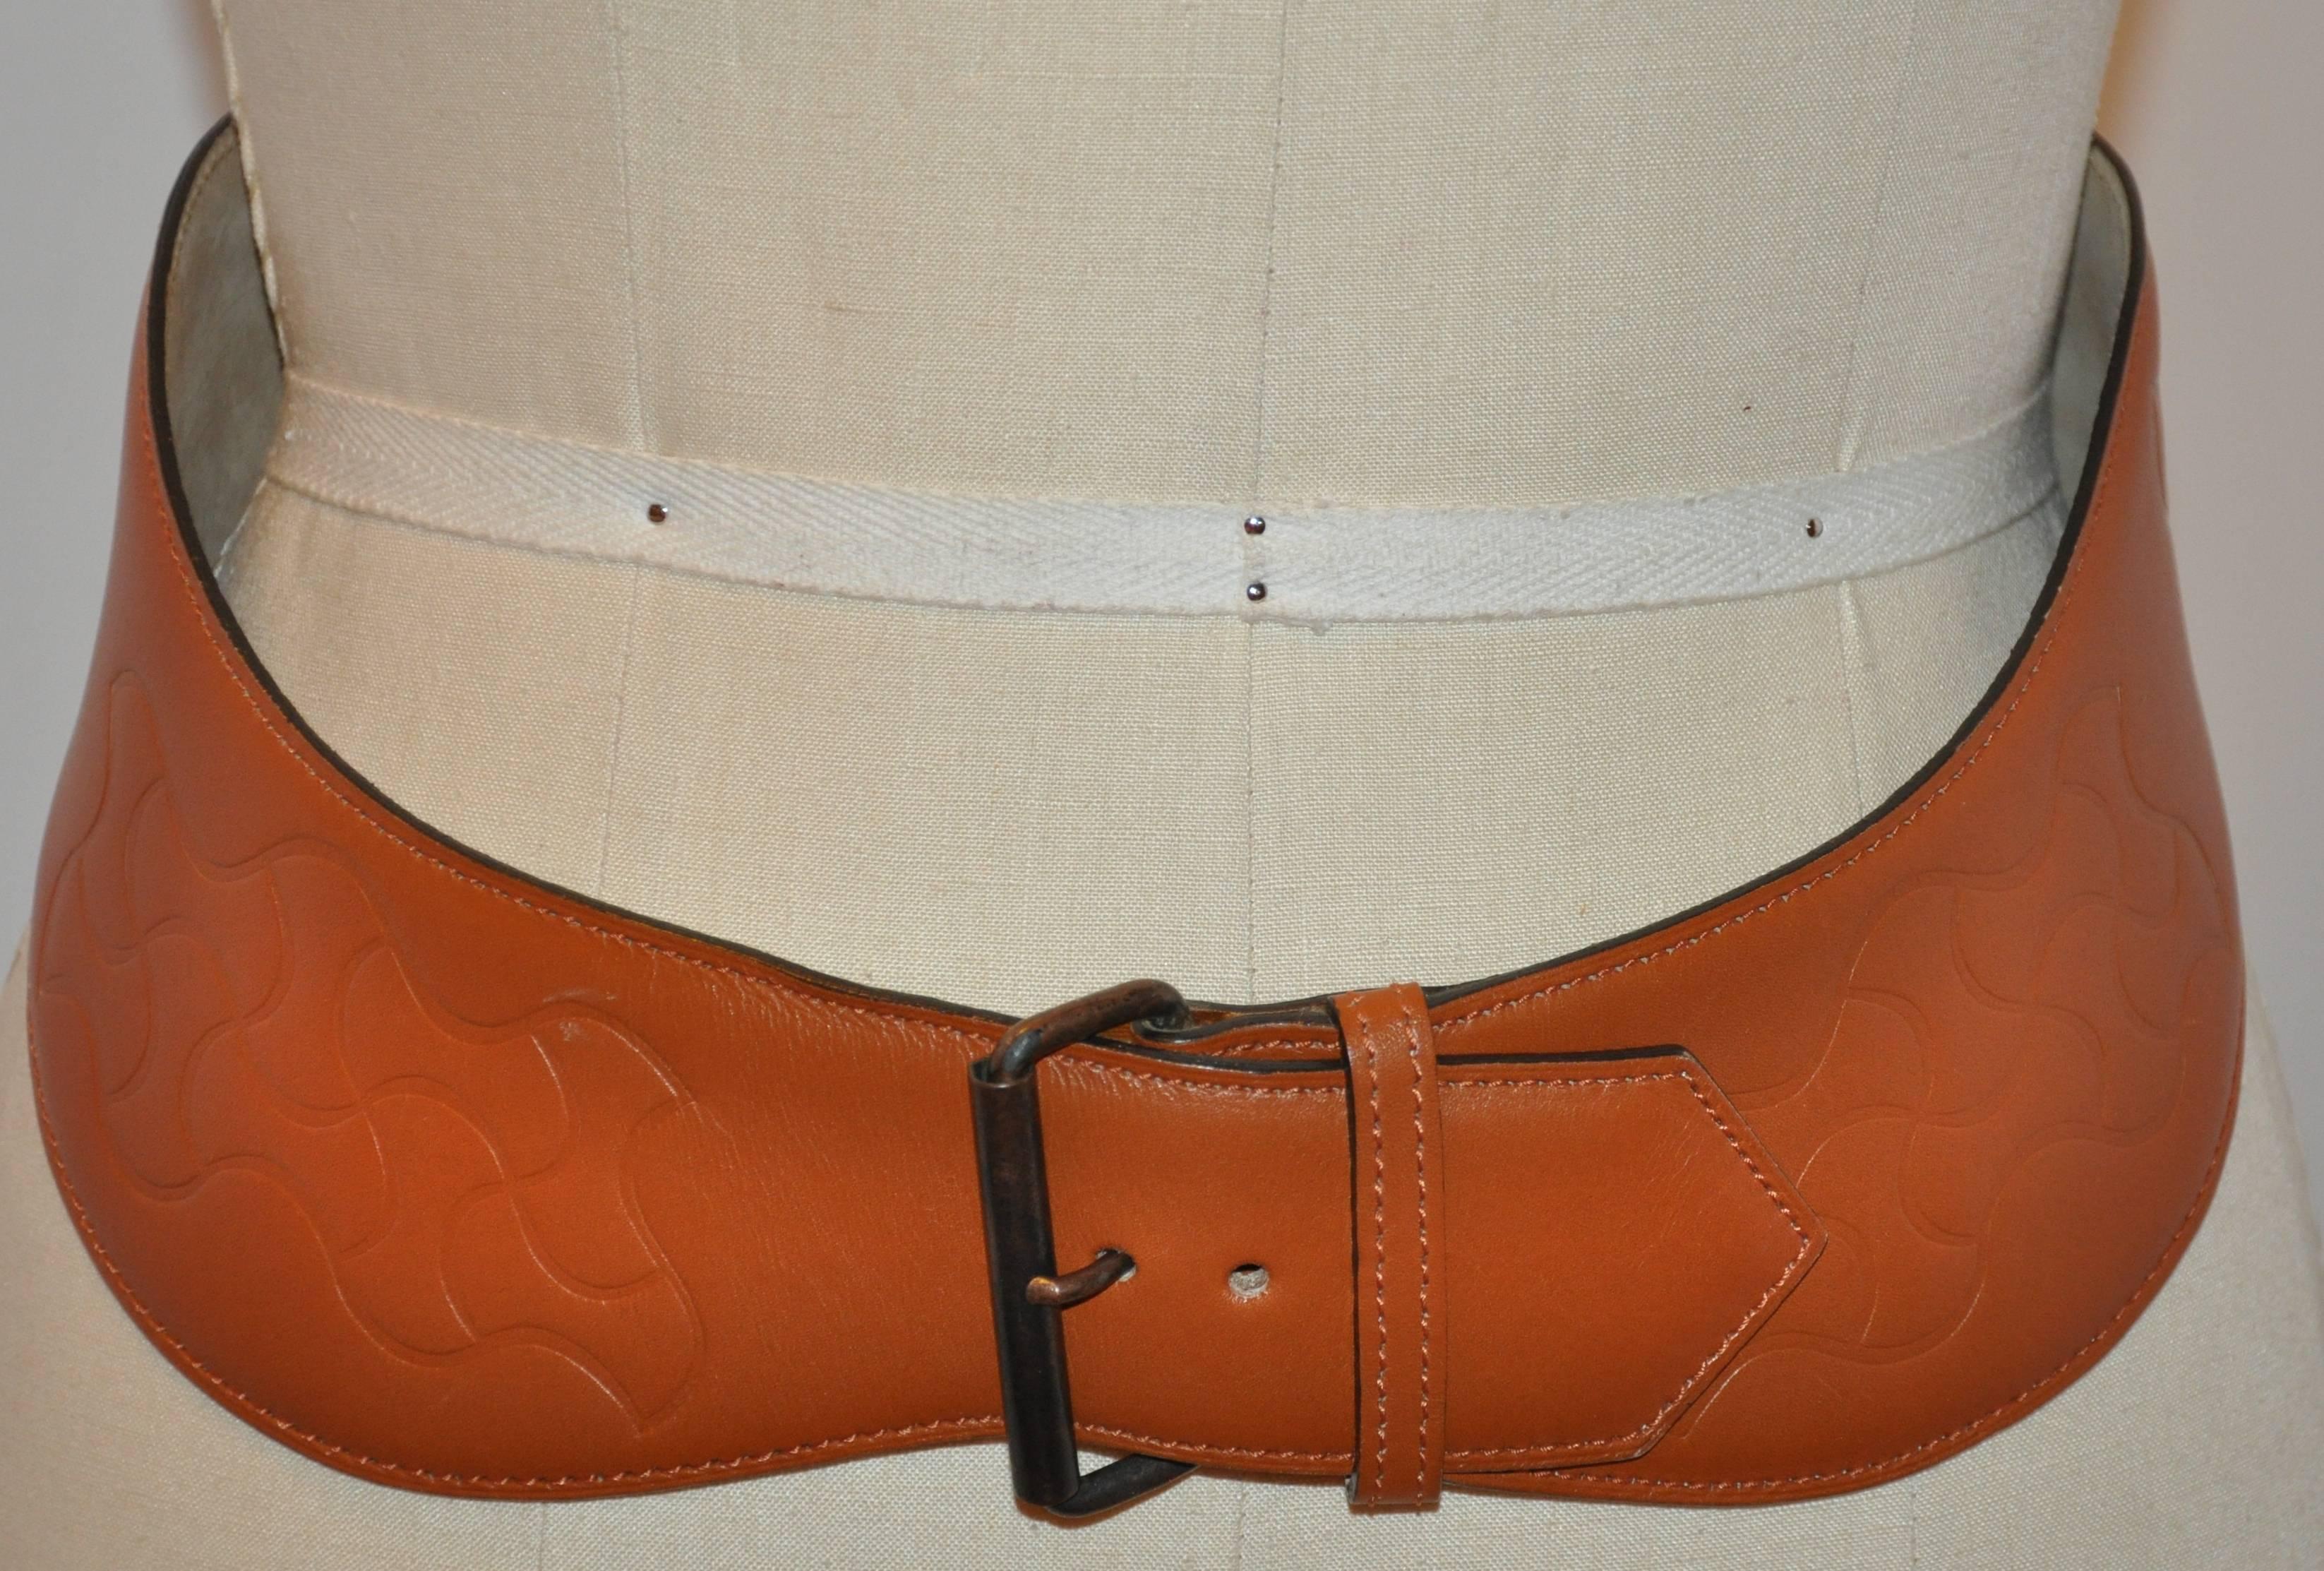        This wonderfully detailed Alaia warm brown curved belt is detailed with embossed accents and measures 2 5/8 inches in width, and finished with top-stitching along the edges. The total length measures 32 inches. Size is 75, made in France.